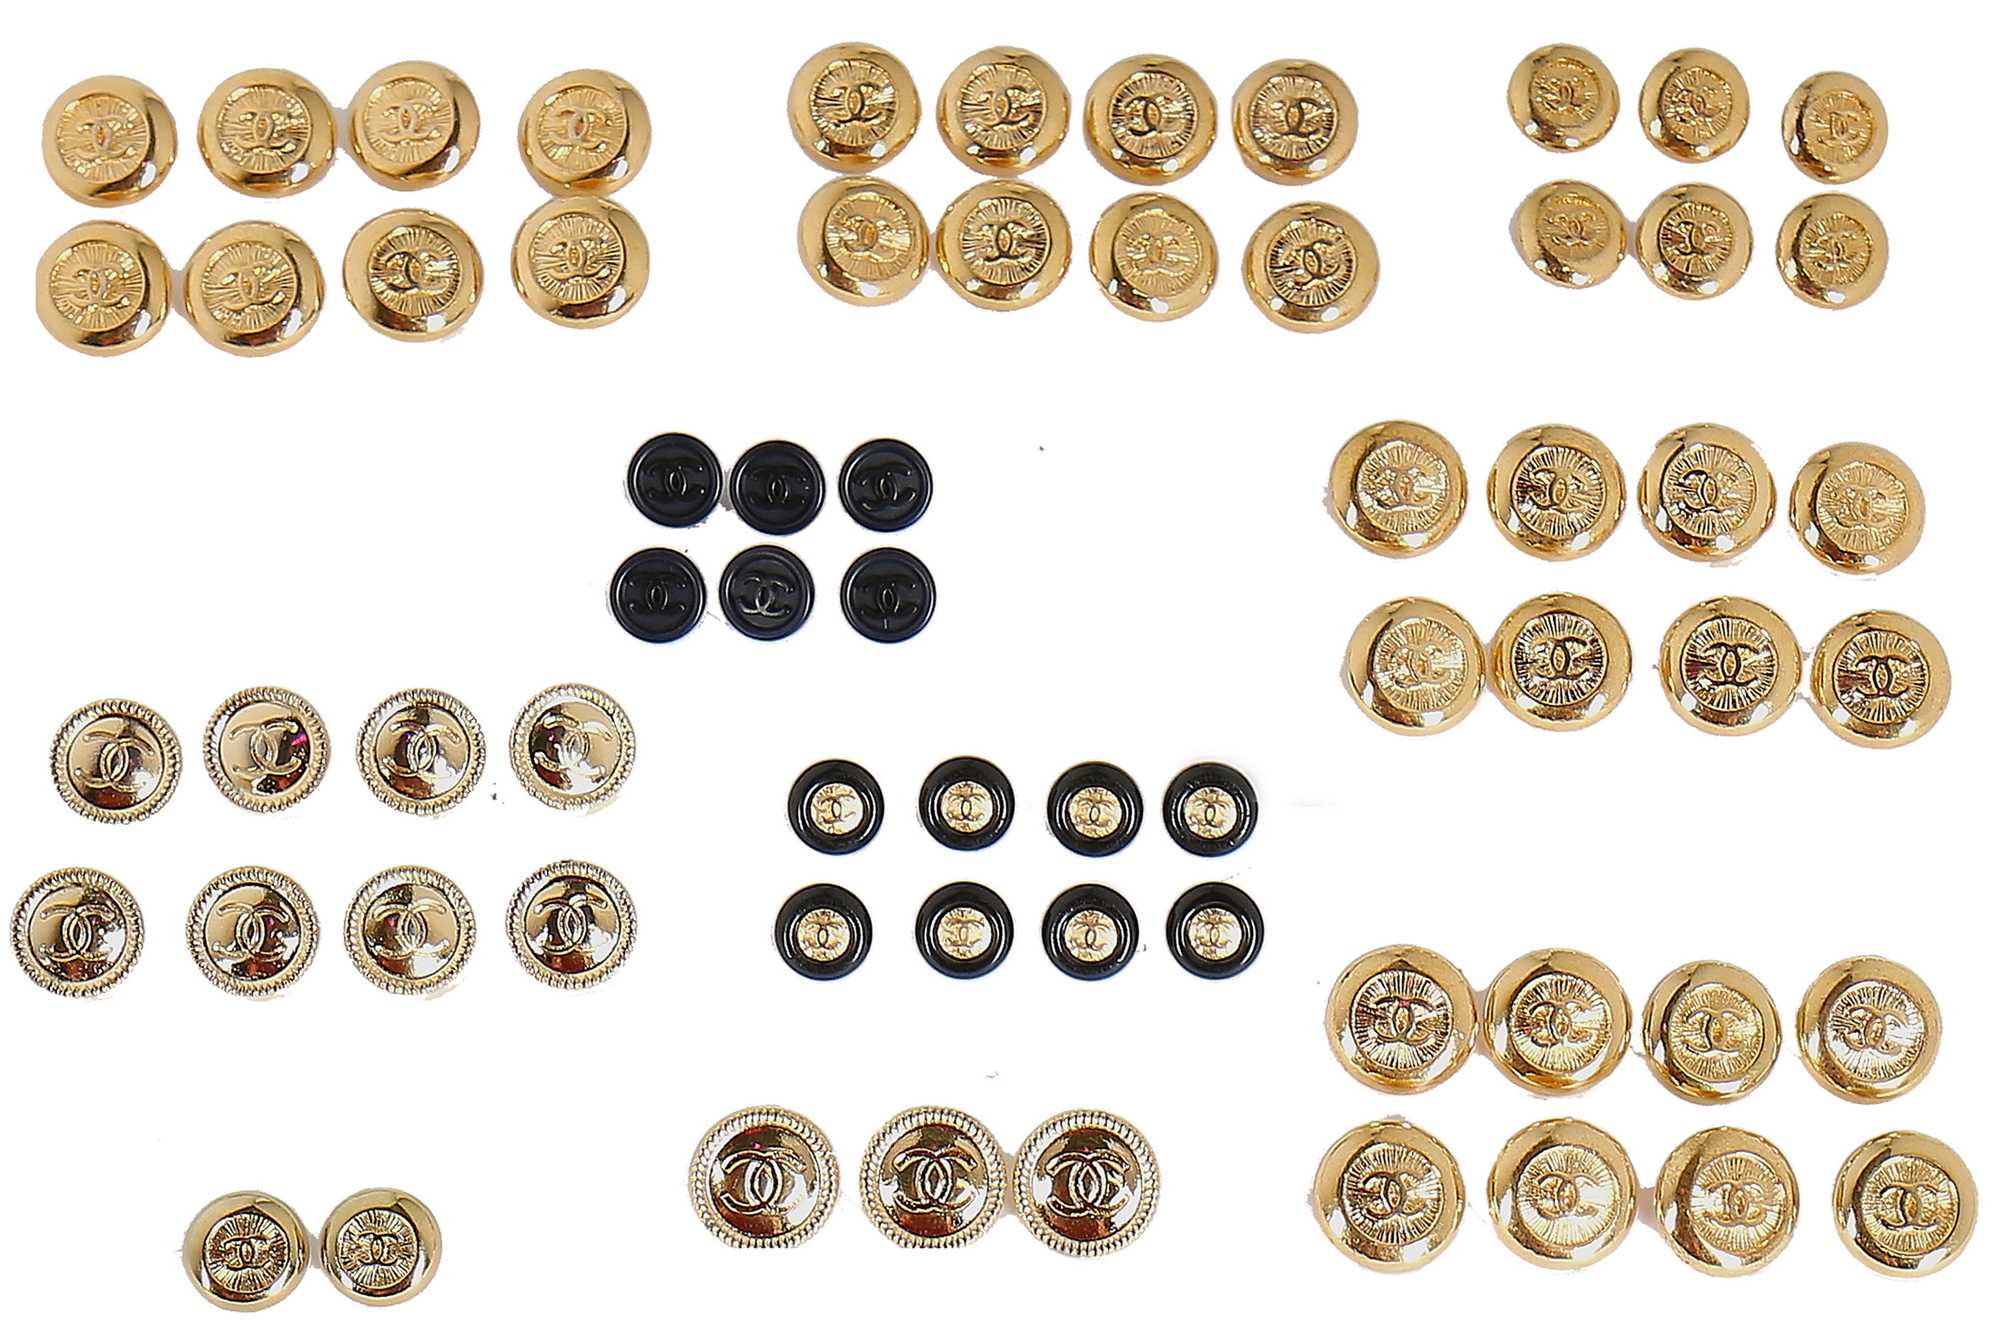 8 Large Vintage Chanel Buttons in Gold W CC Monogram in twisted rope design